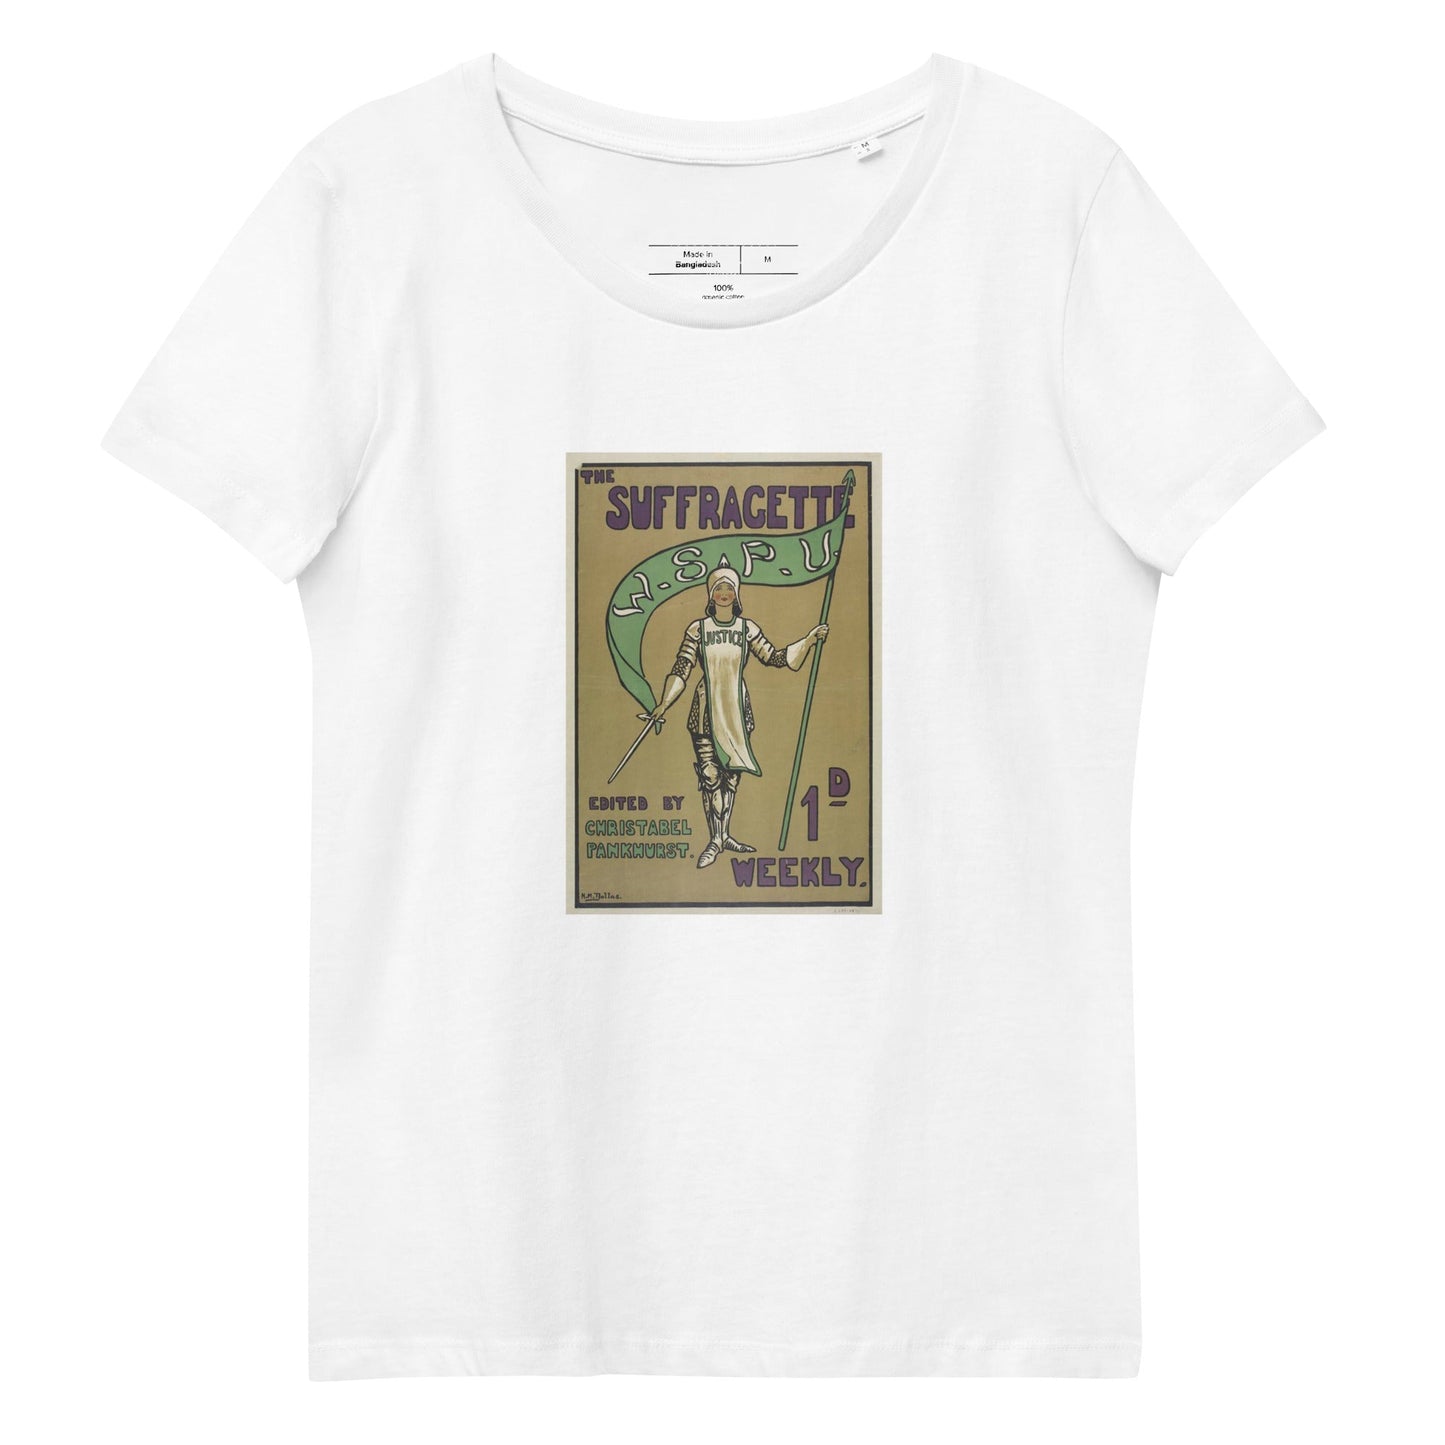 The Suffragette - Women's fitted eco tee - Souled Out World